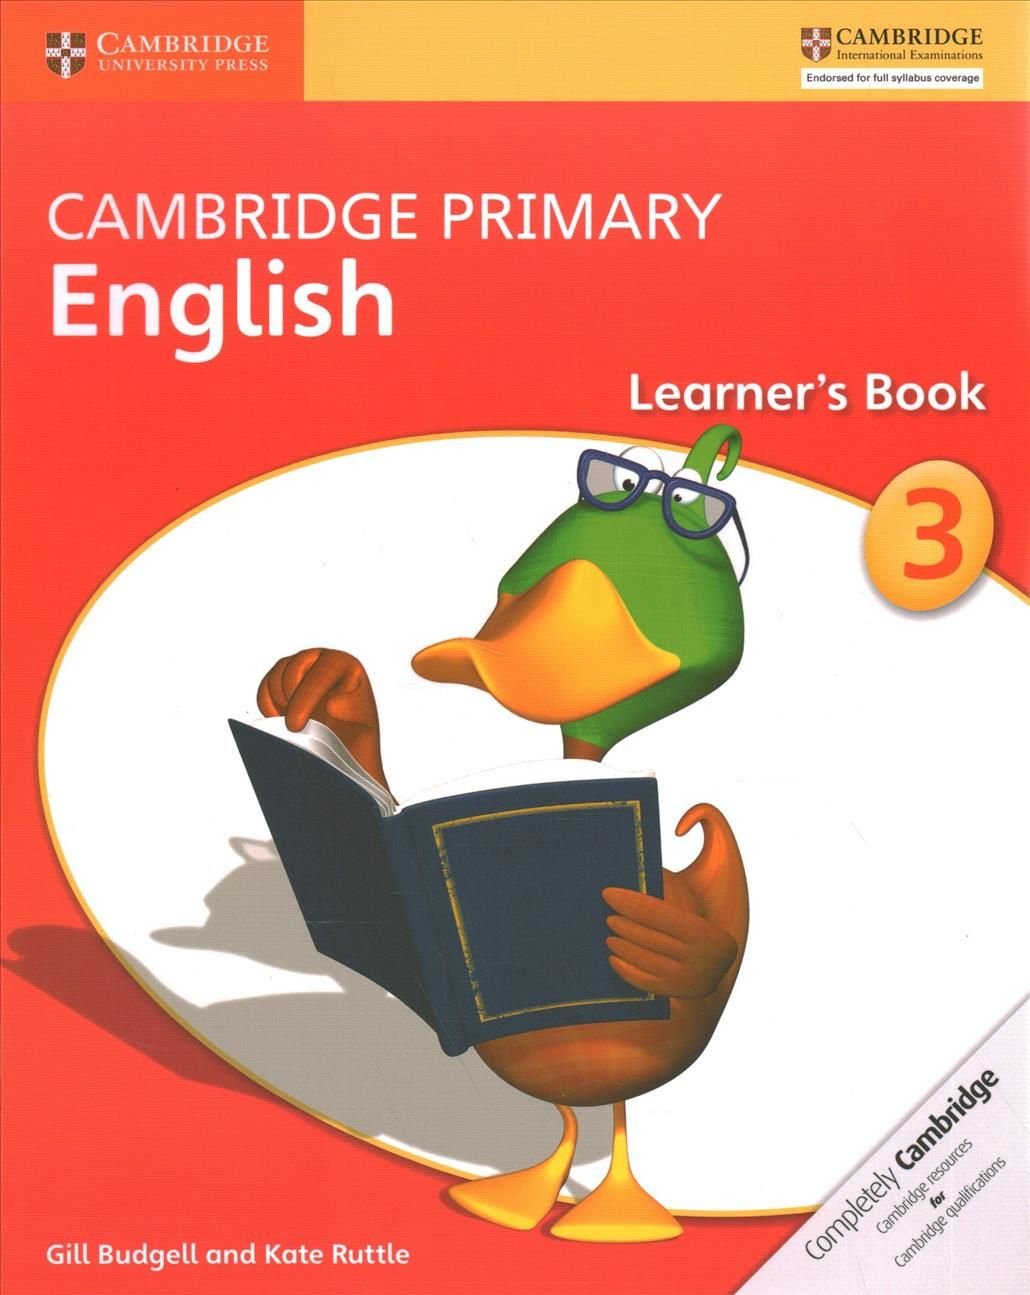 Stage　by　Buy　English　With　Free　Delivery　Cambridge　Book　Gill　Primary　Learner's　Budgell